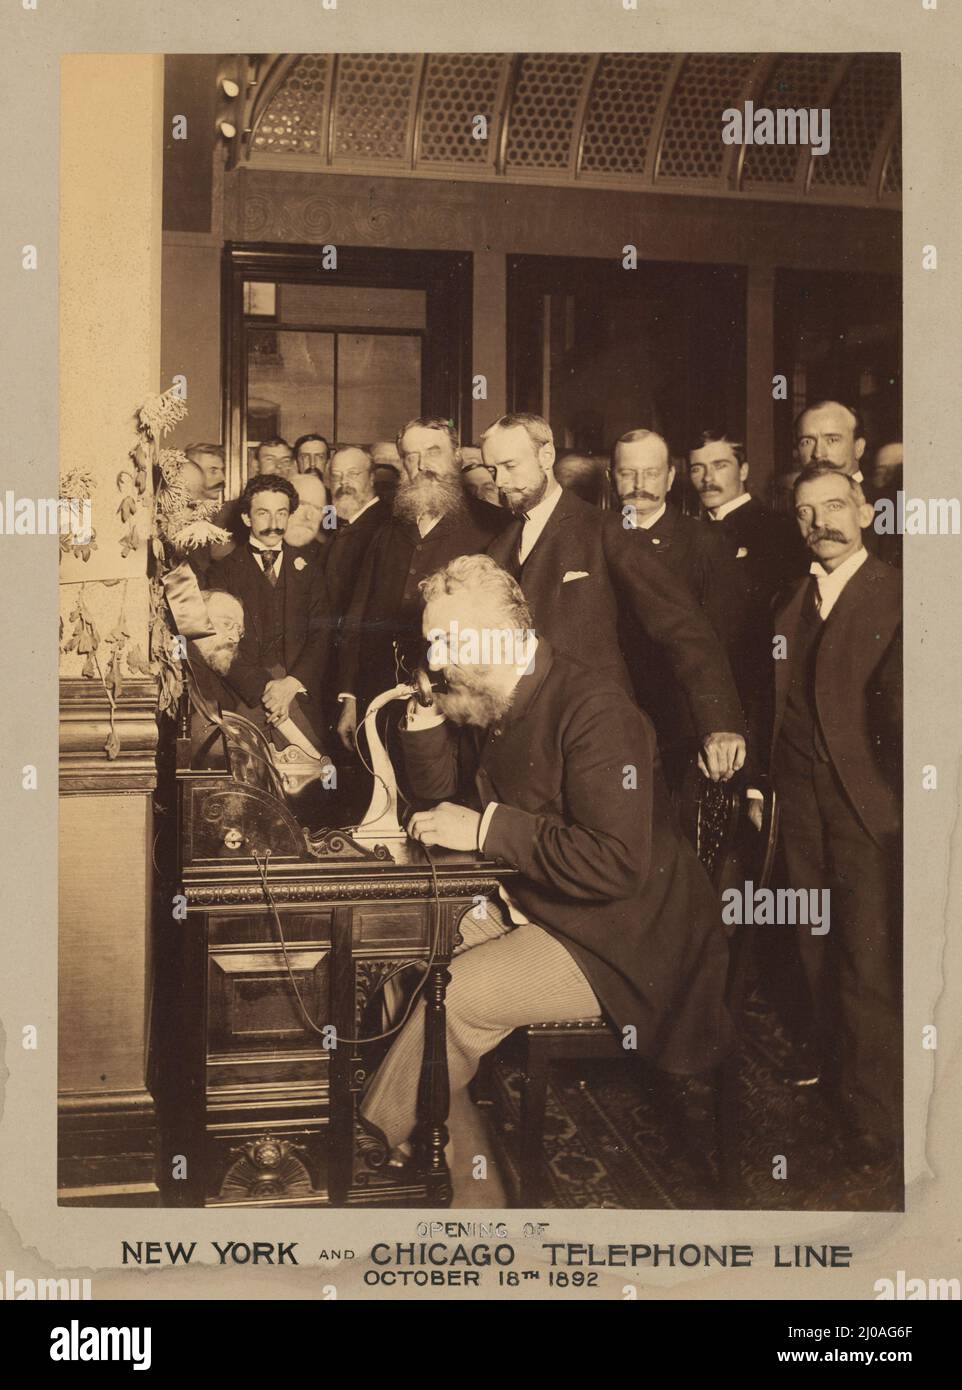 Vintage black and white photograph of American inventor Alexander Graham Bell using a telephone at the opening of the New York and Chicago telephone line in 1892 Stock Photo